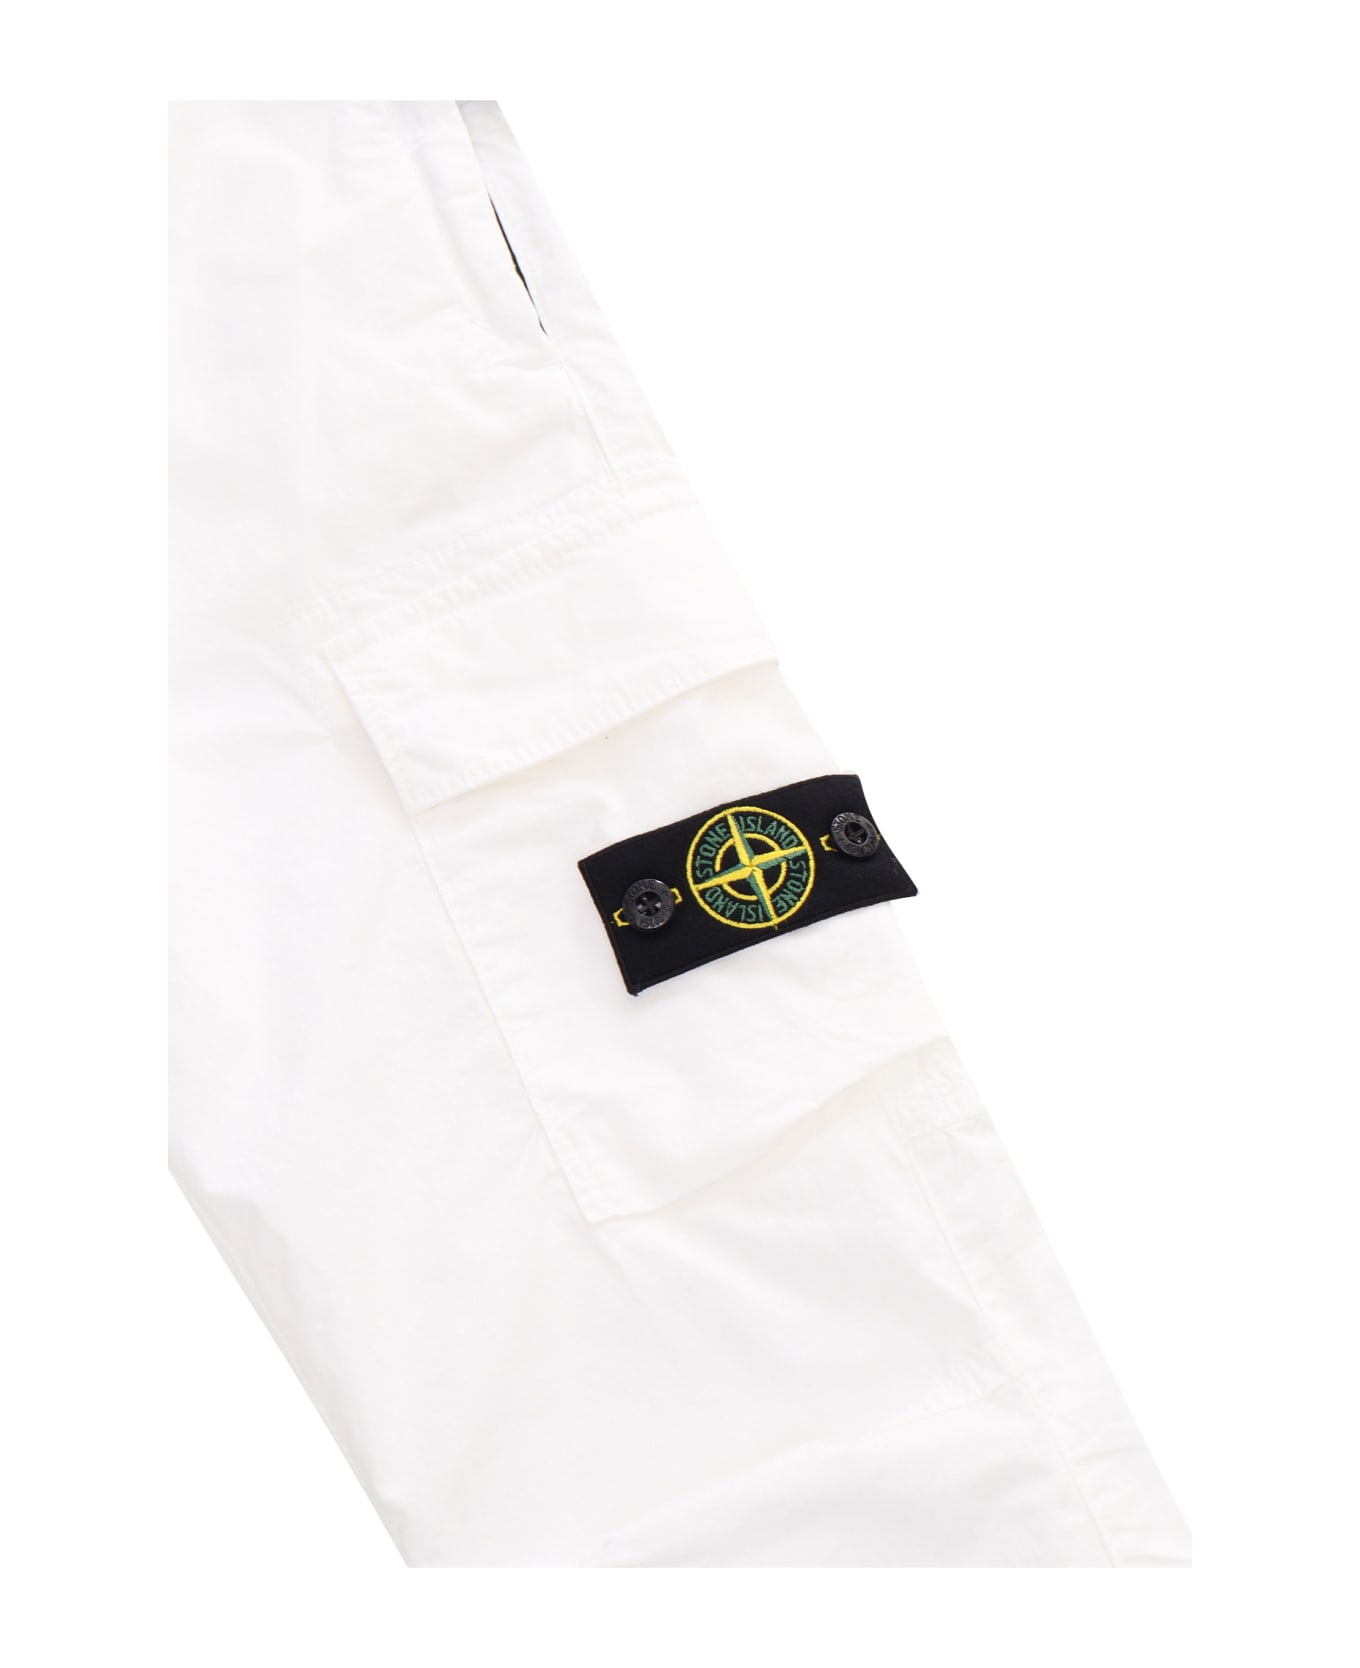 Stone Island Junior White Trousers With Pockets - WHITE